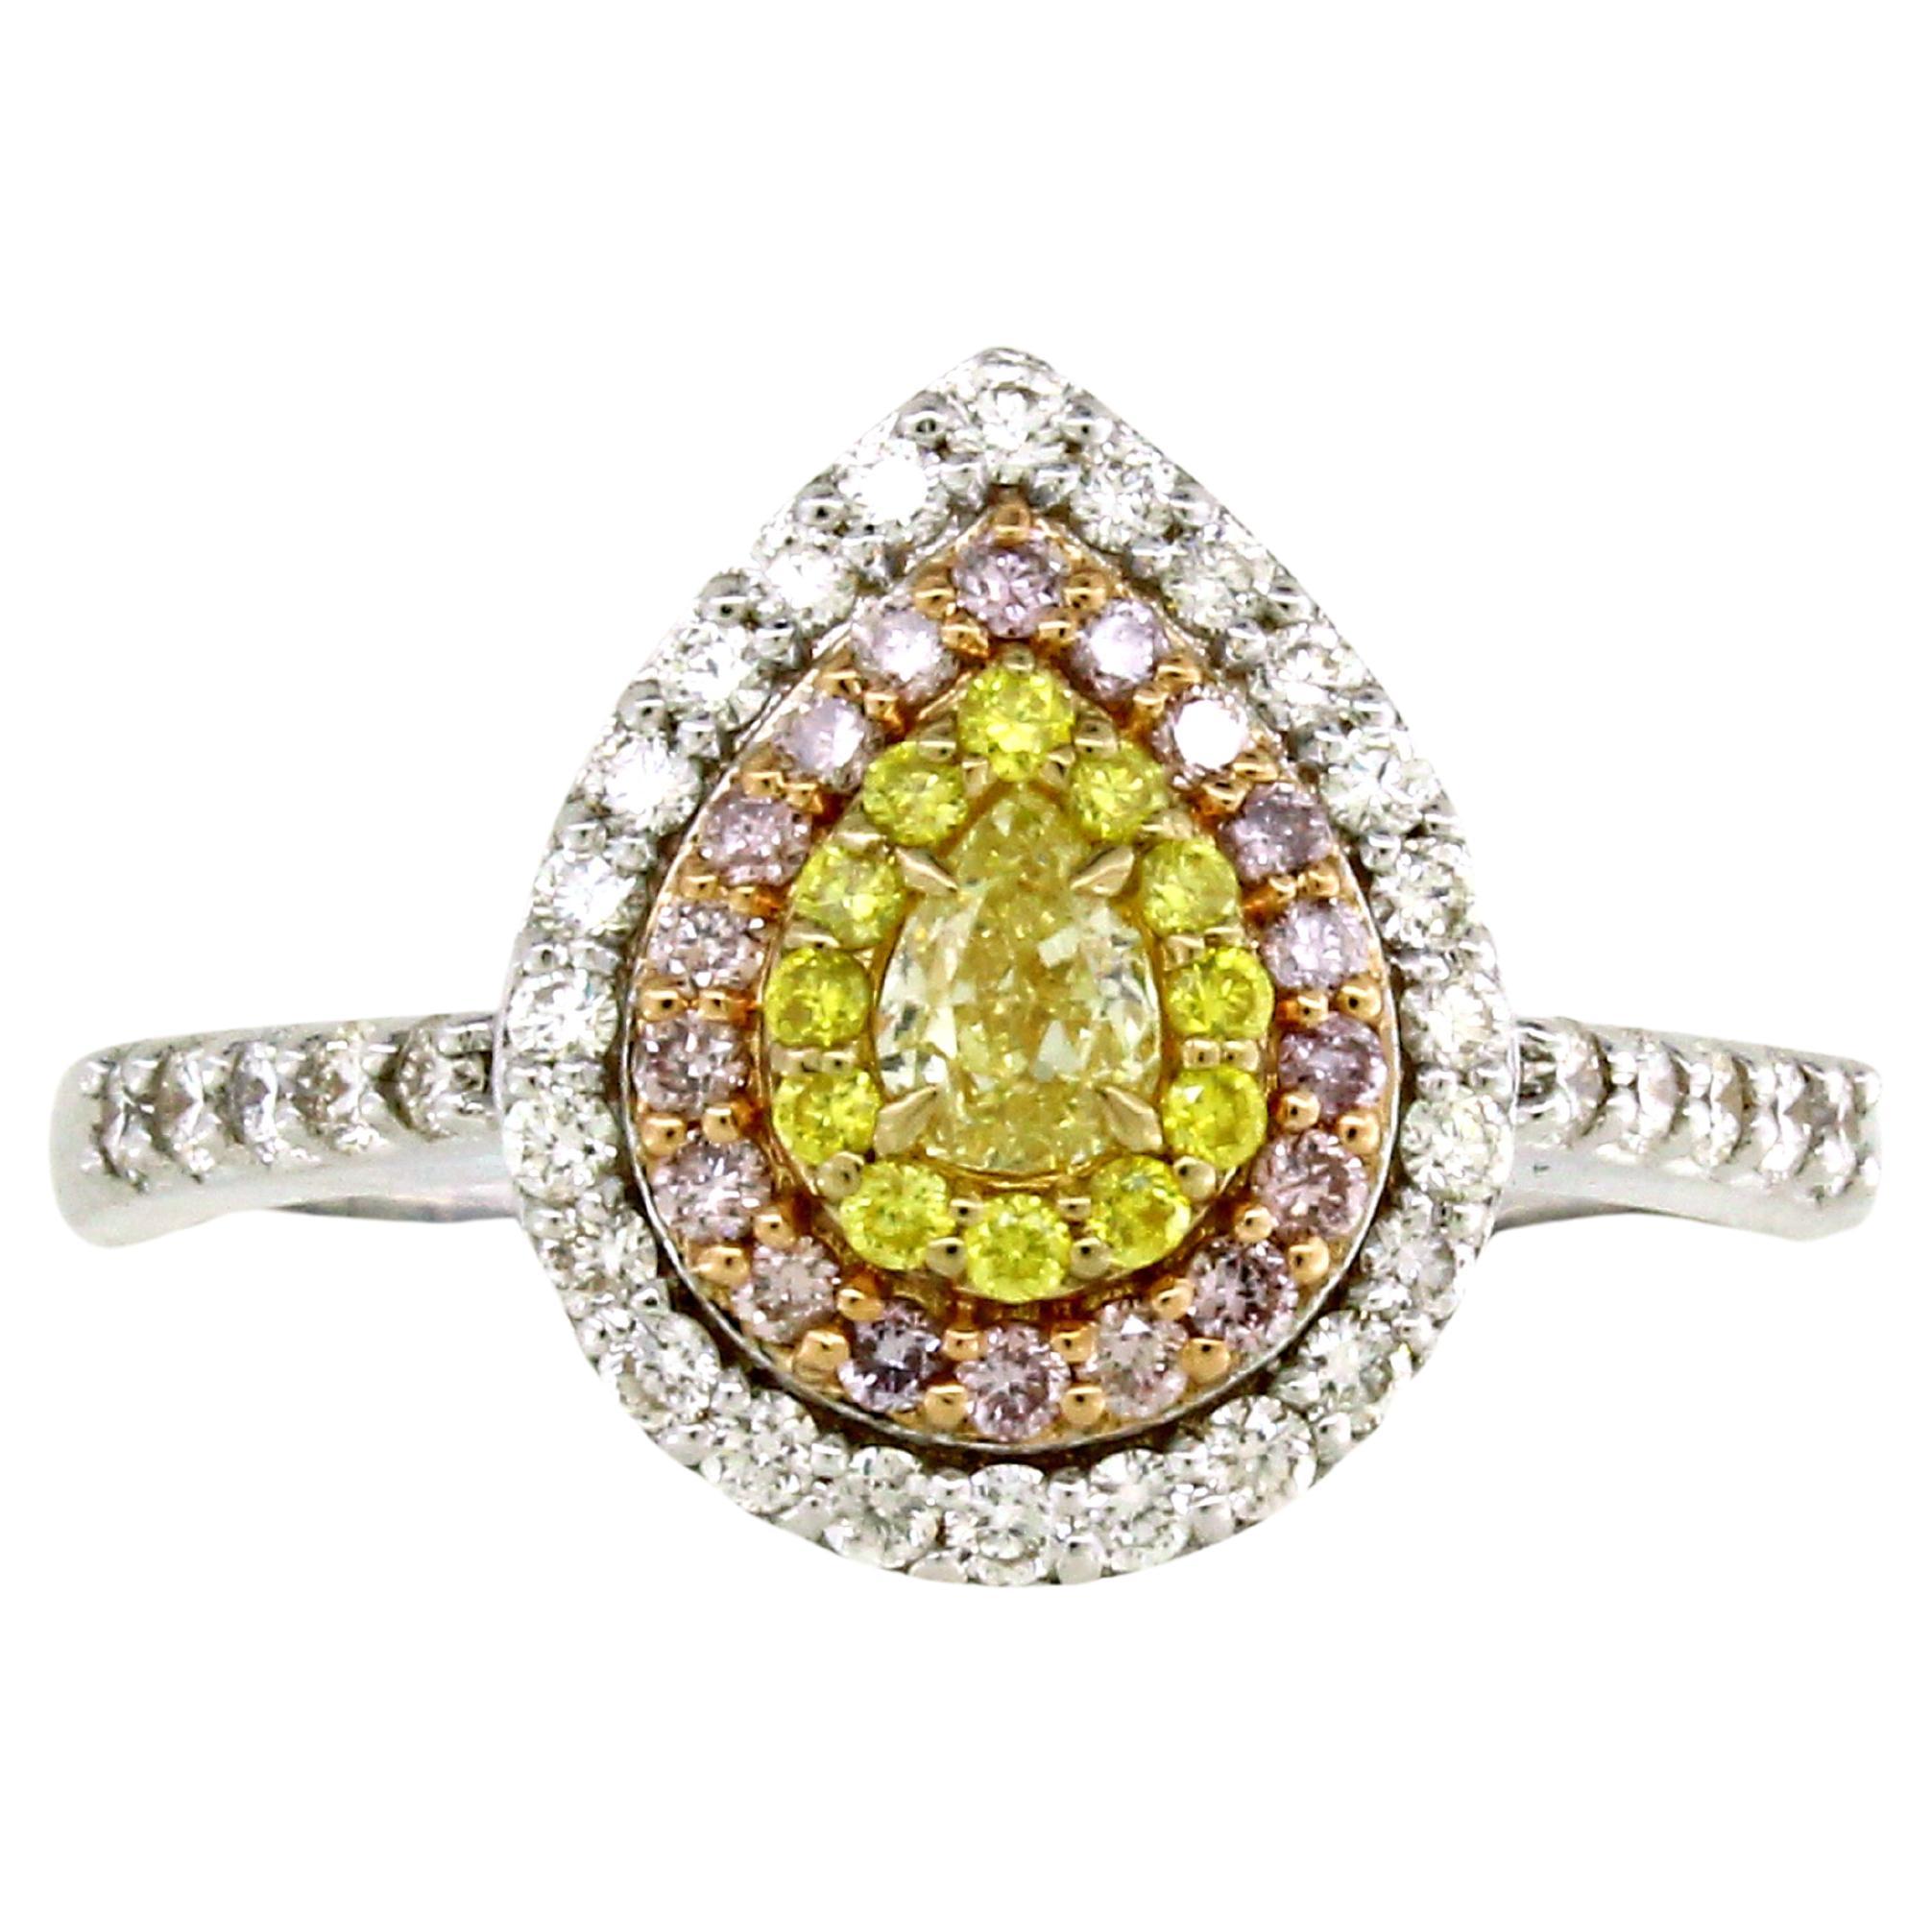 The Rose Diamond - Natural Pink Pear Shaped Diamond Ring For Sale at ...